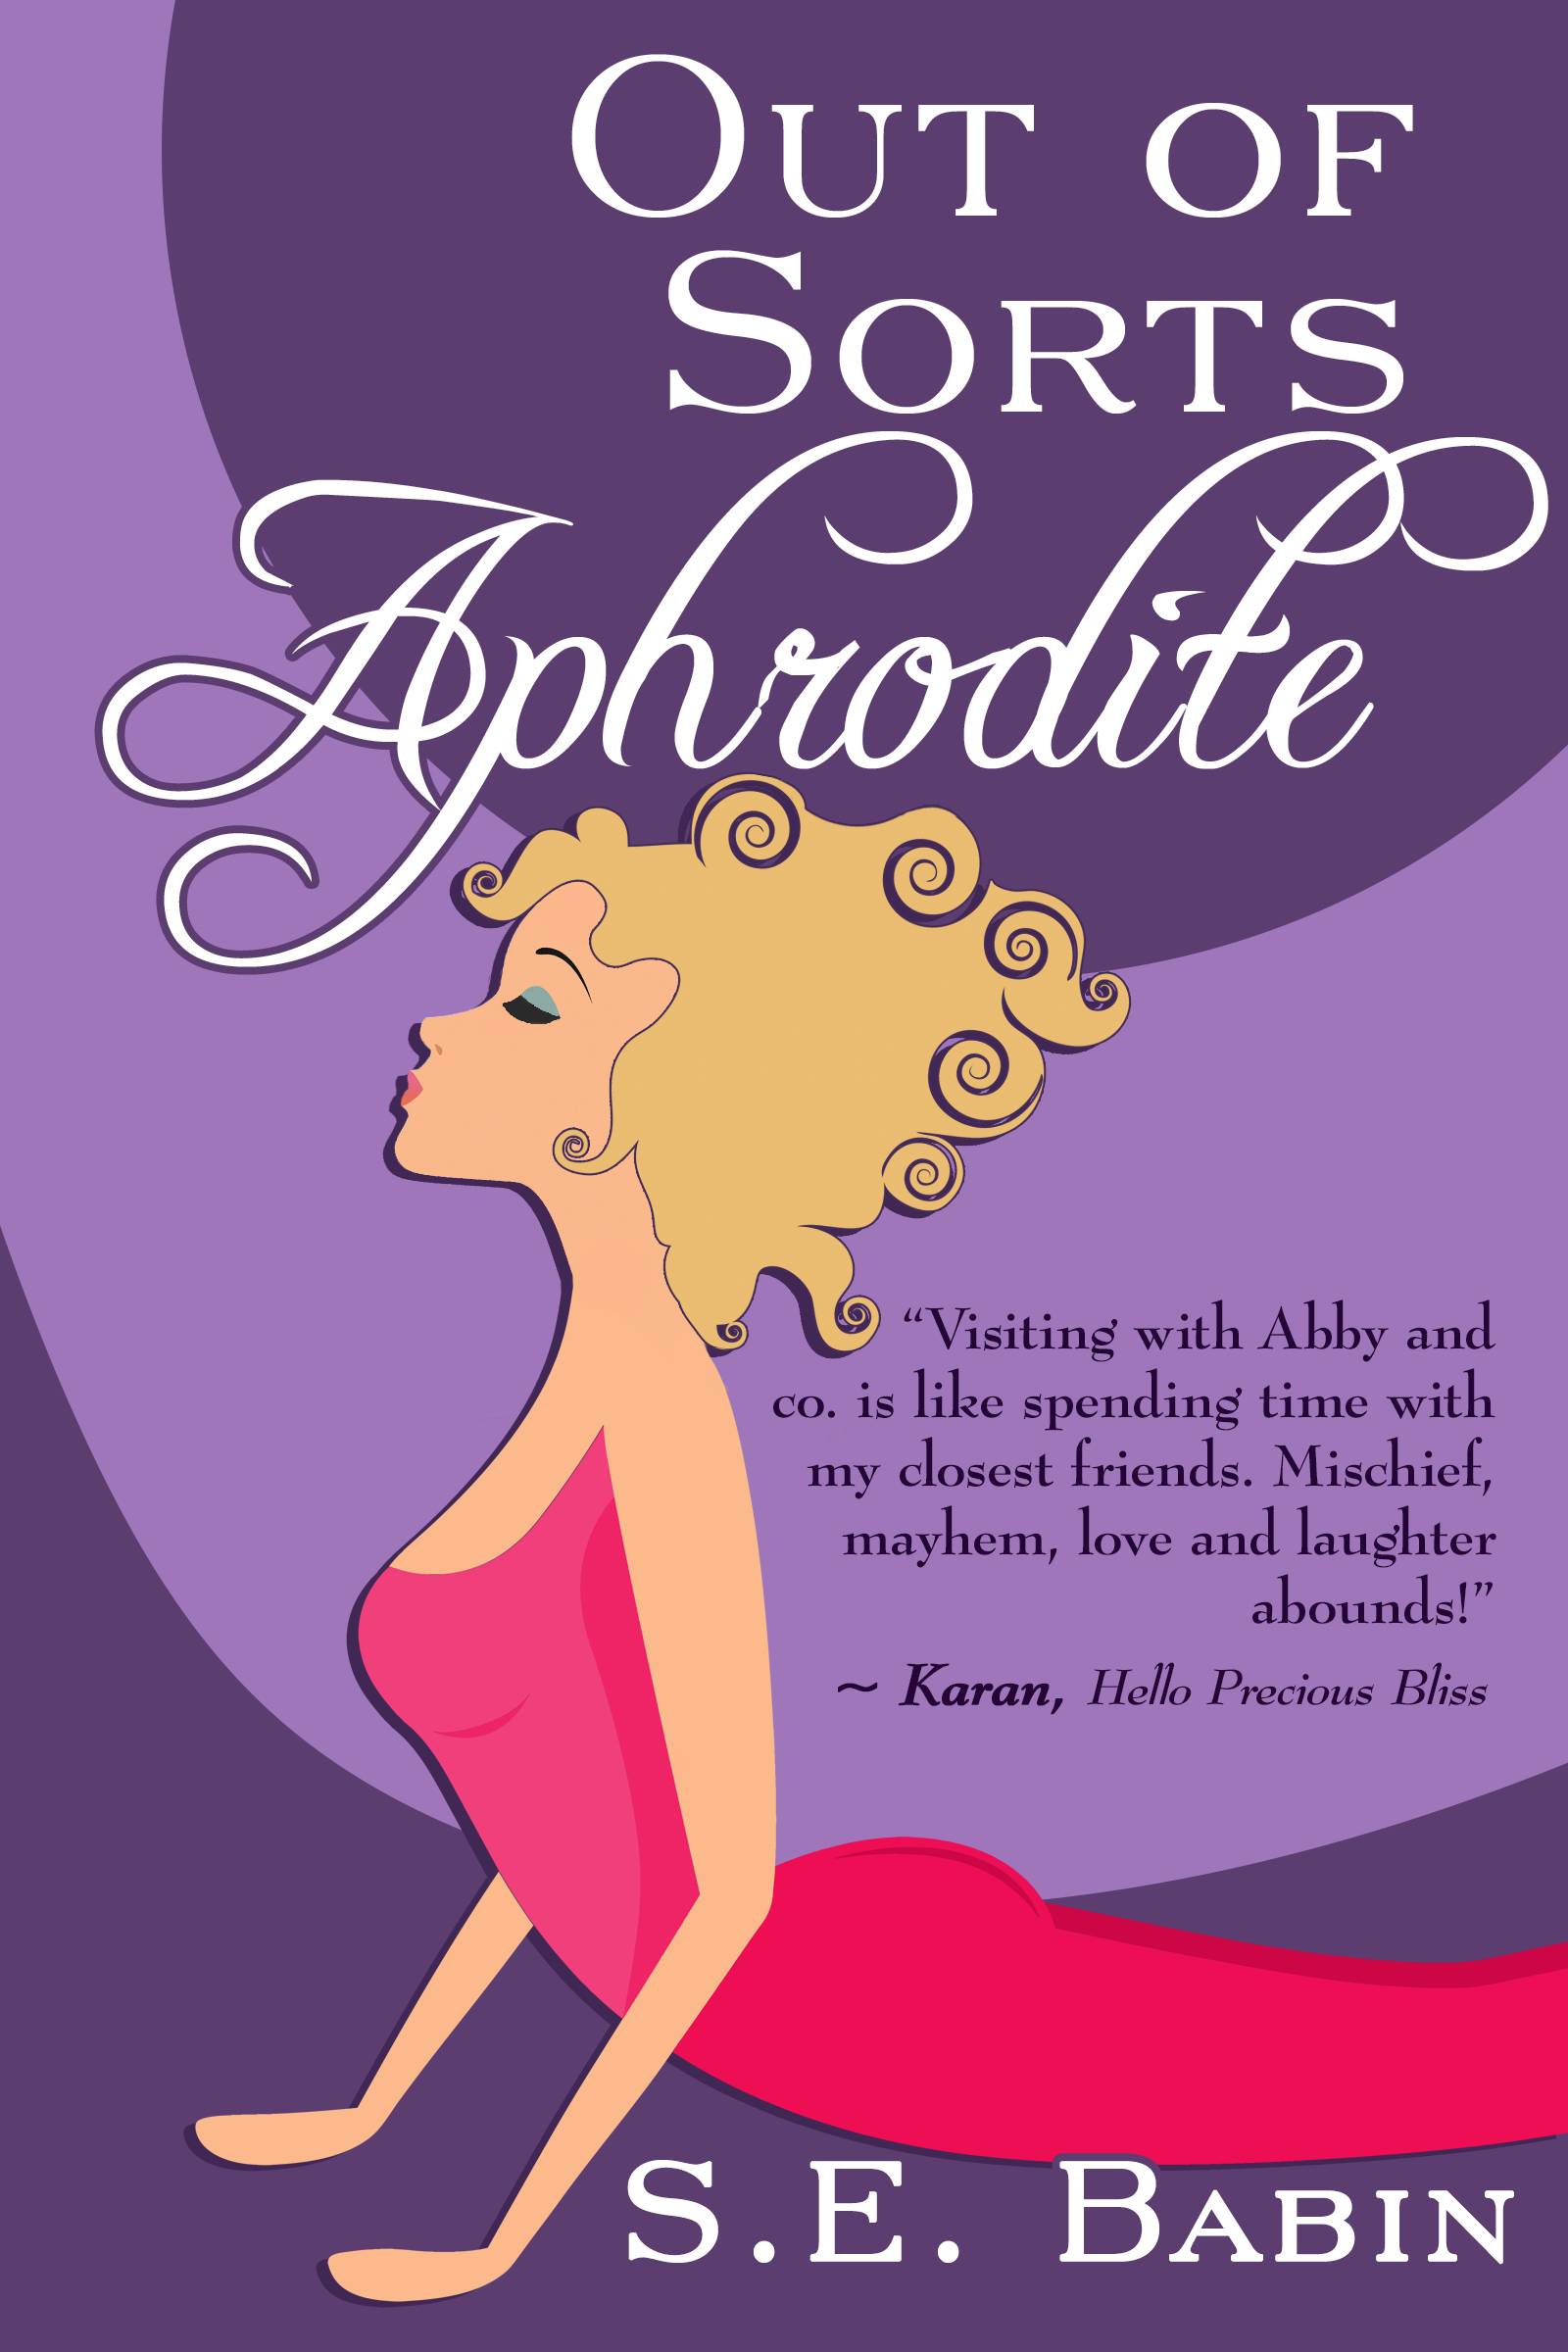 Cover Reveal! Out of Sorts Aphrodite by S.E. Babin